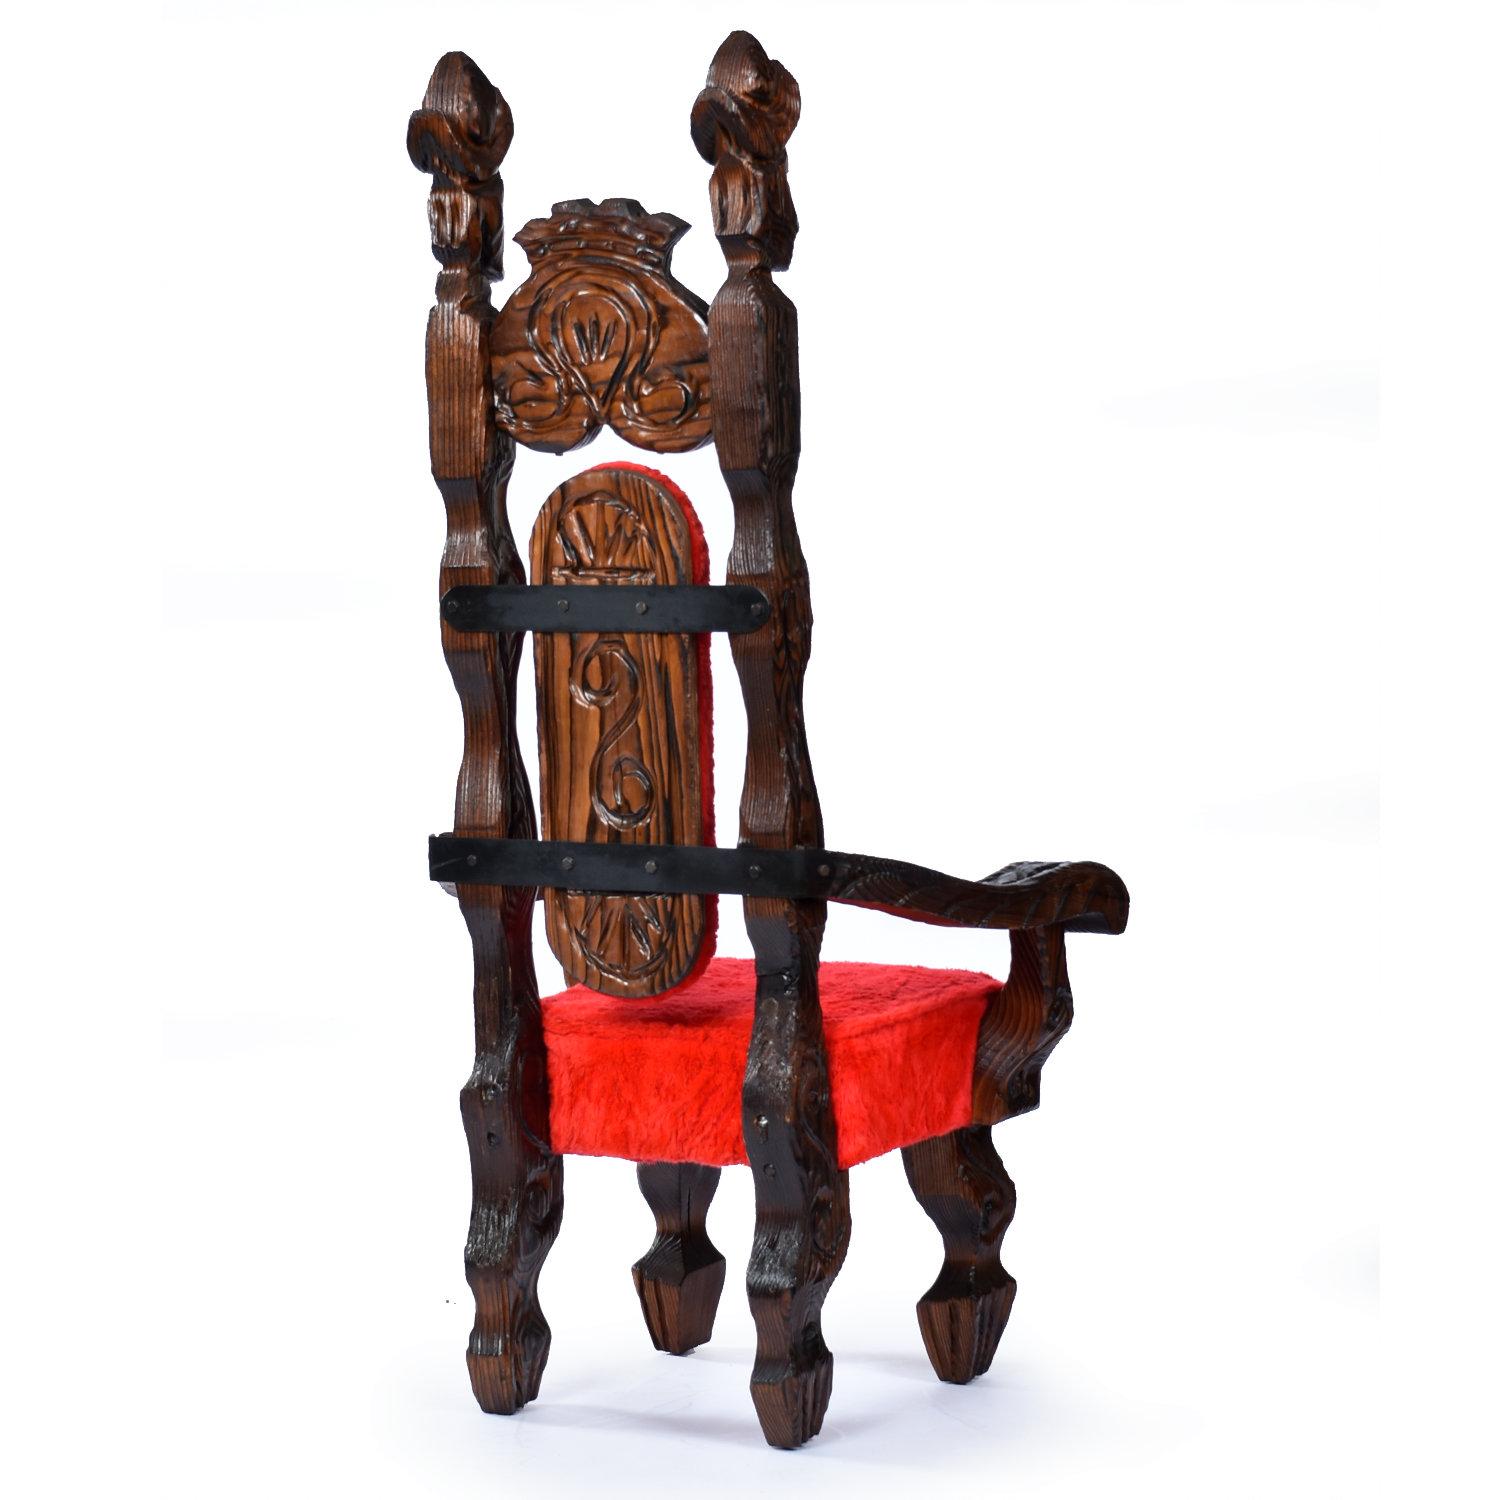 '2' Restored Vintage Witco Conquistador Tiki Throne Chairs in Original Red Fur For Sale 1